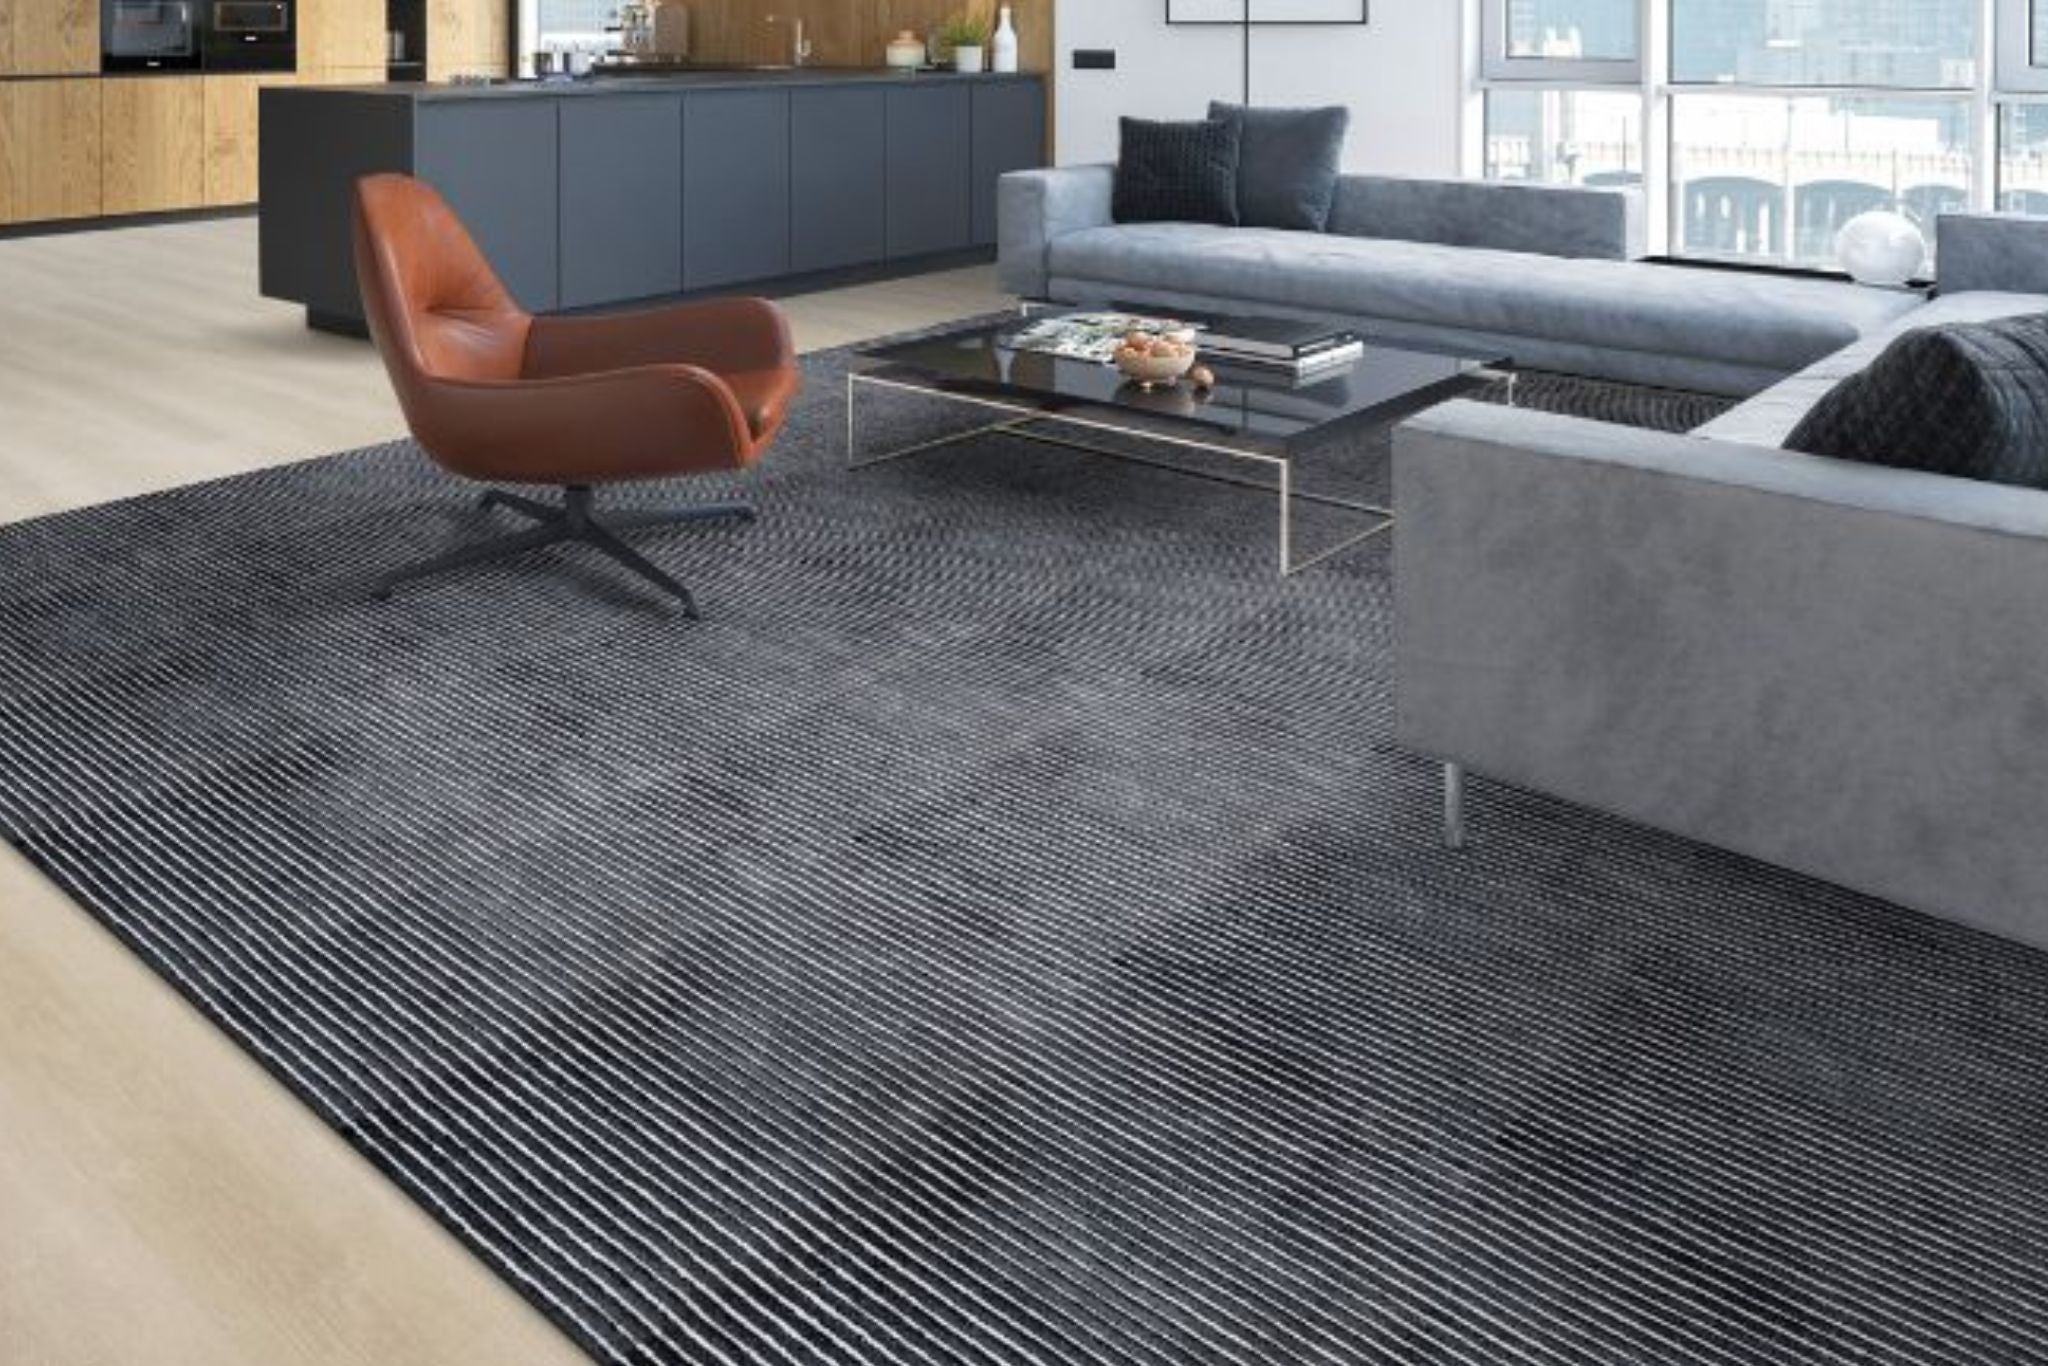 A Comprehensive Guide to Choosing the Perfect Broadloom Rug for Your Home